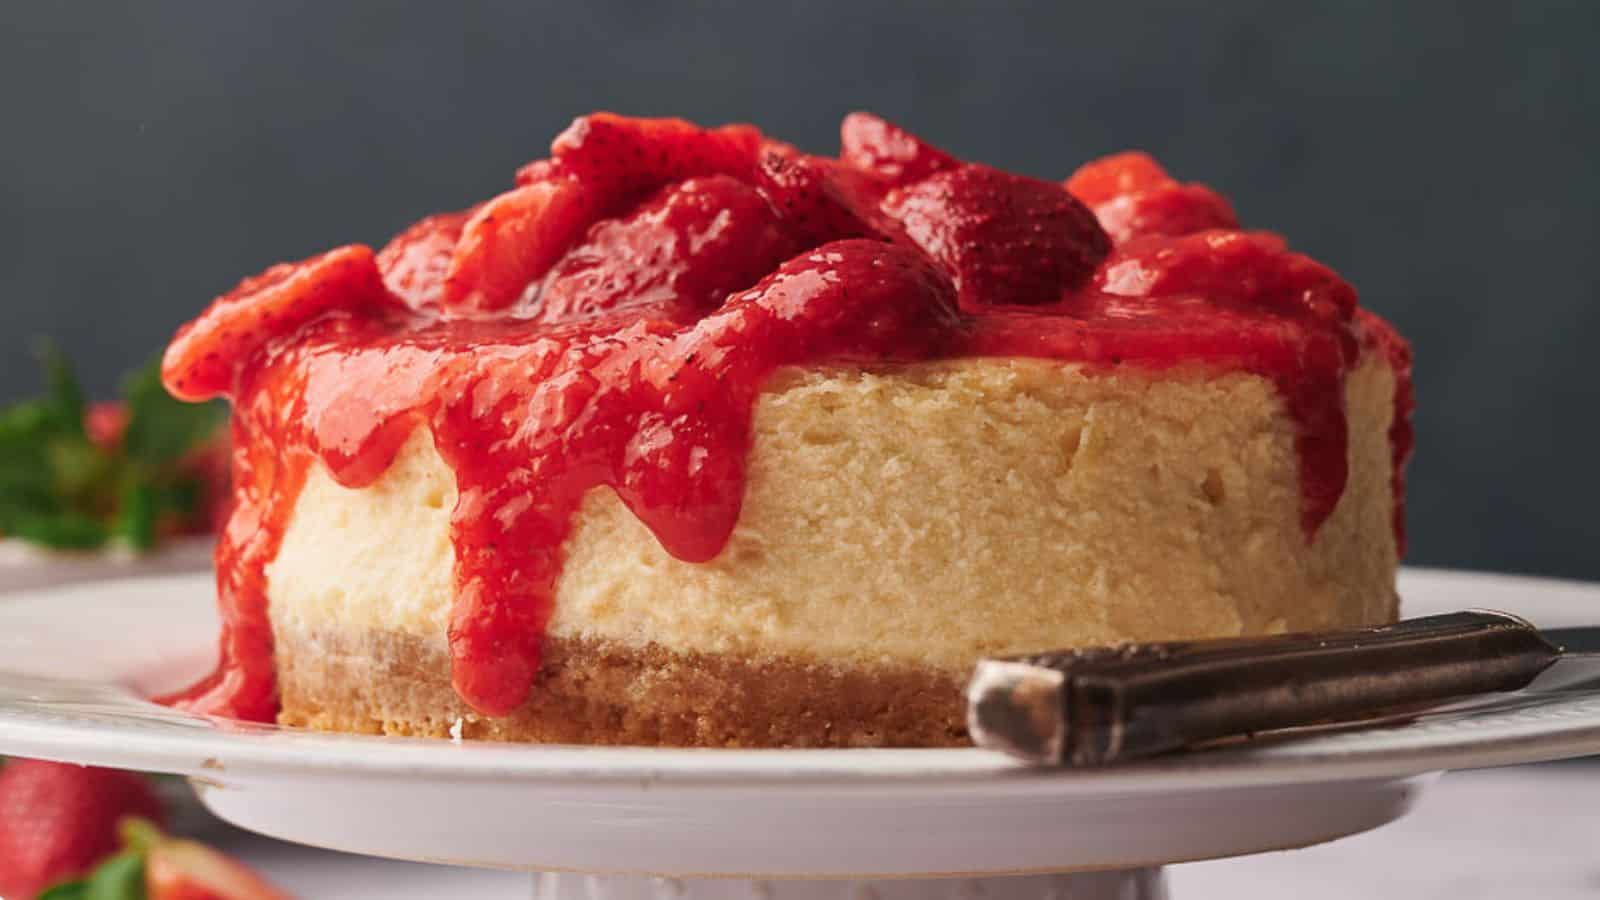 <p>A timeless classic that never disappoints. The fruity tang of strawberries complements the creamy cheesecake base. An absolute win with both kids and adults.<br><strong>Get the Recipe: </strong><a href="https://www.splashoftaste.com/strawberry-cheesecake/?utm_source=msn&utm_medium=page&utm_campaign=msn">Strawberry Cheesecake</a></p>